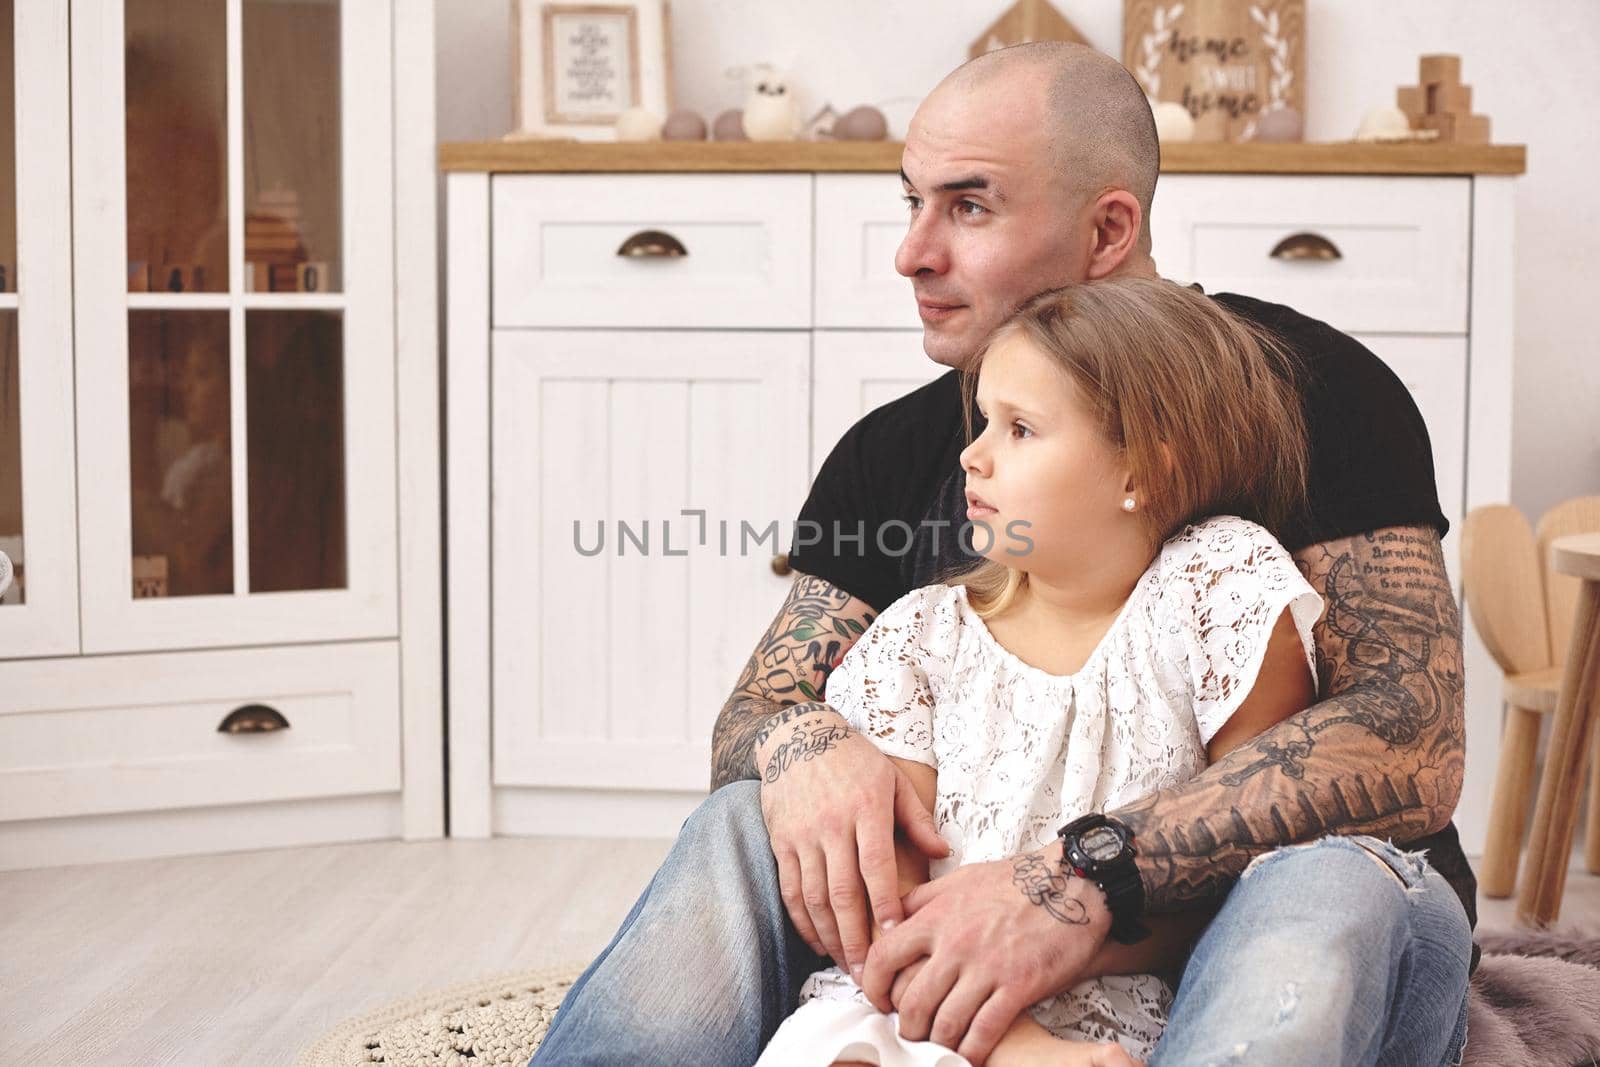 White modern kid's room whith a wooden furniture. Adorable daughter with a long blond hair wearing a white dress. Daddy with tattoos is hugging her and they are looking somewhere. Friendly family spending their free time together sitting on a pillows.